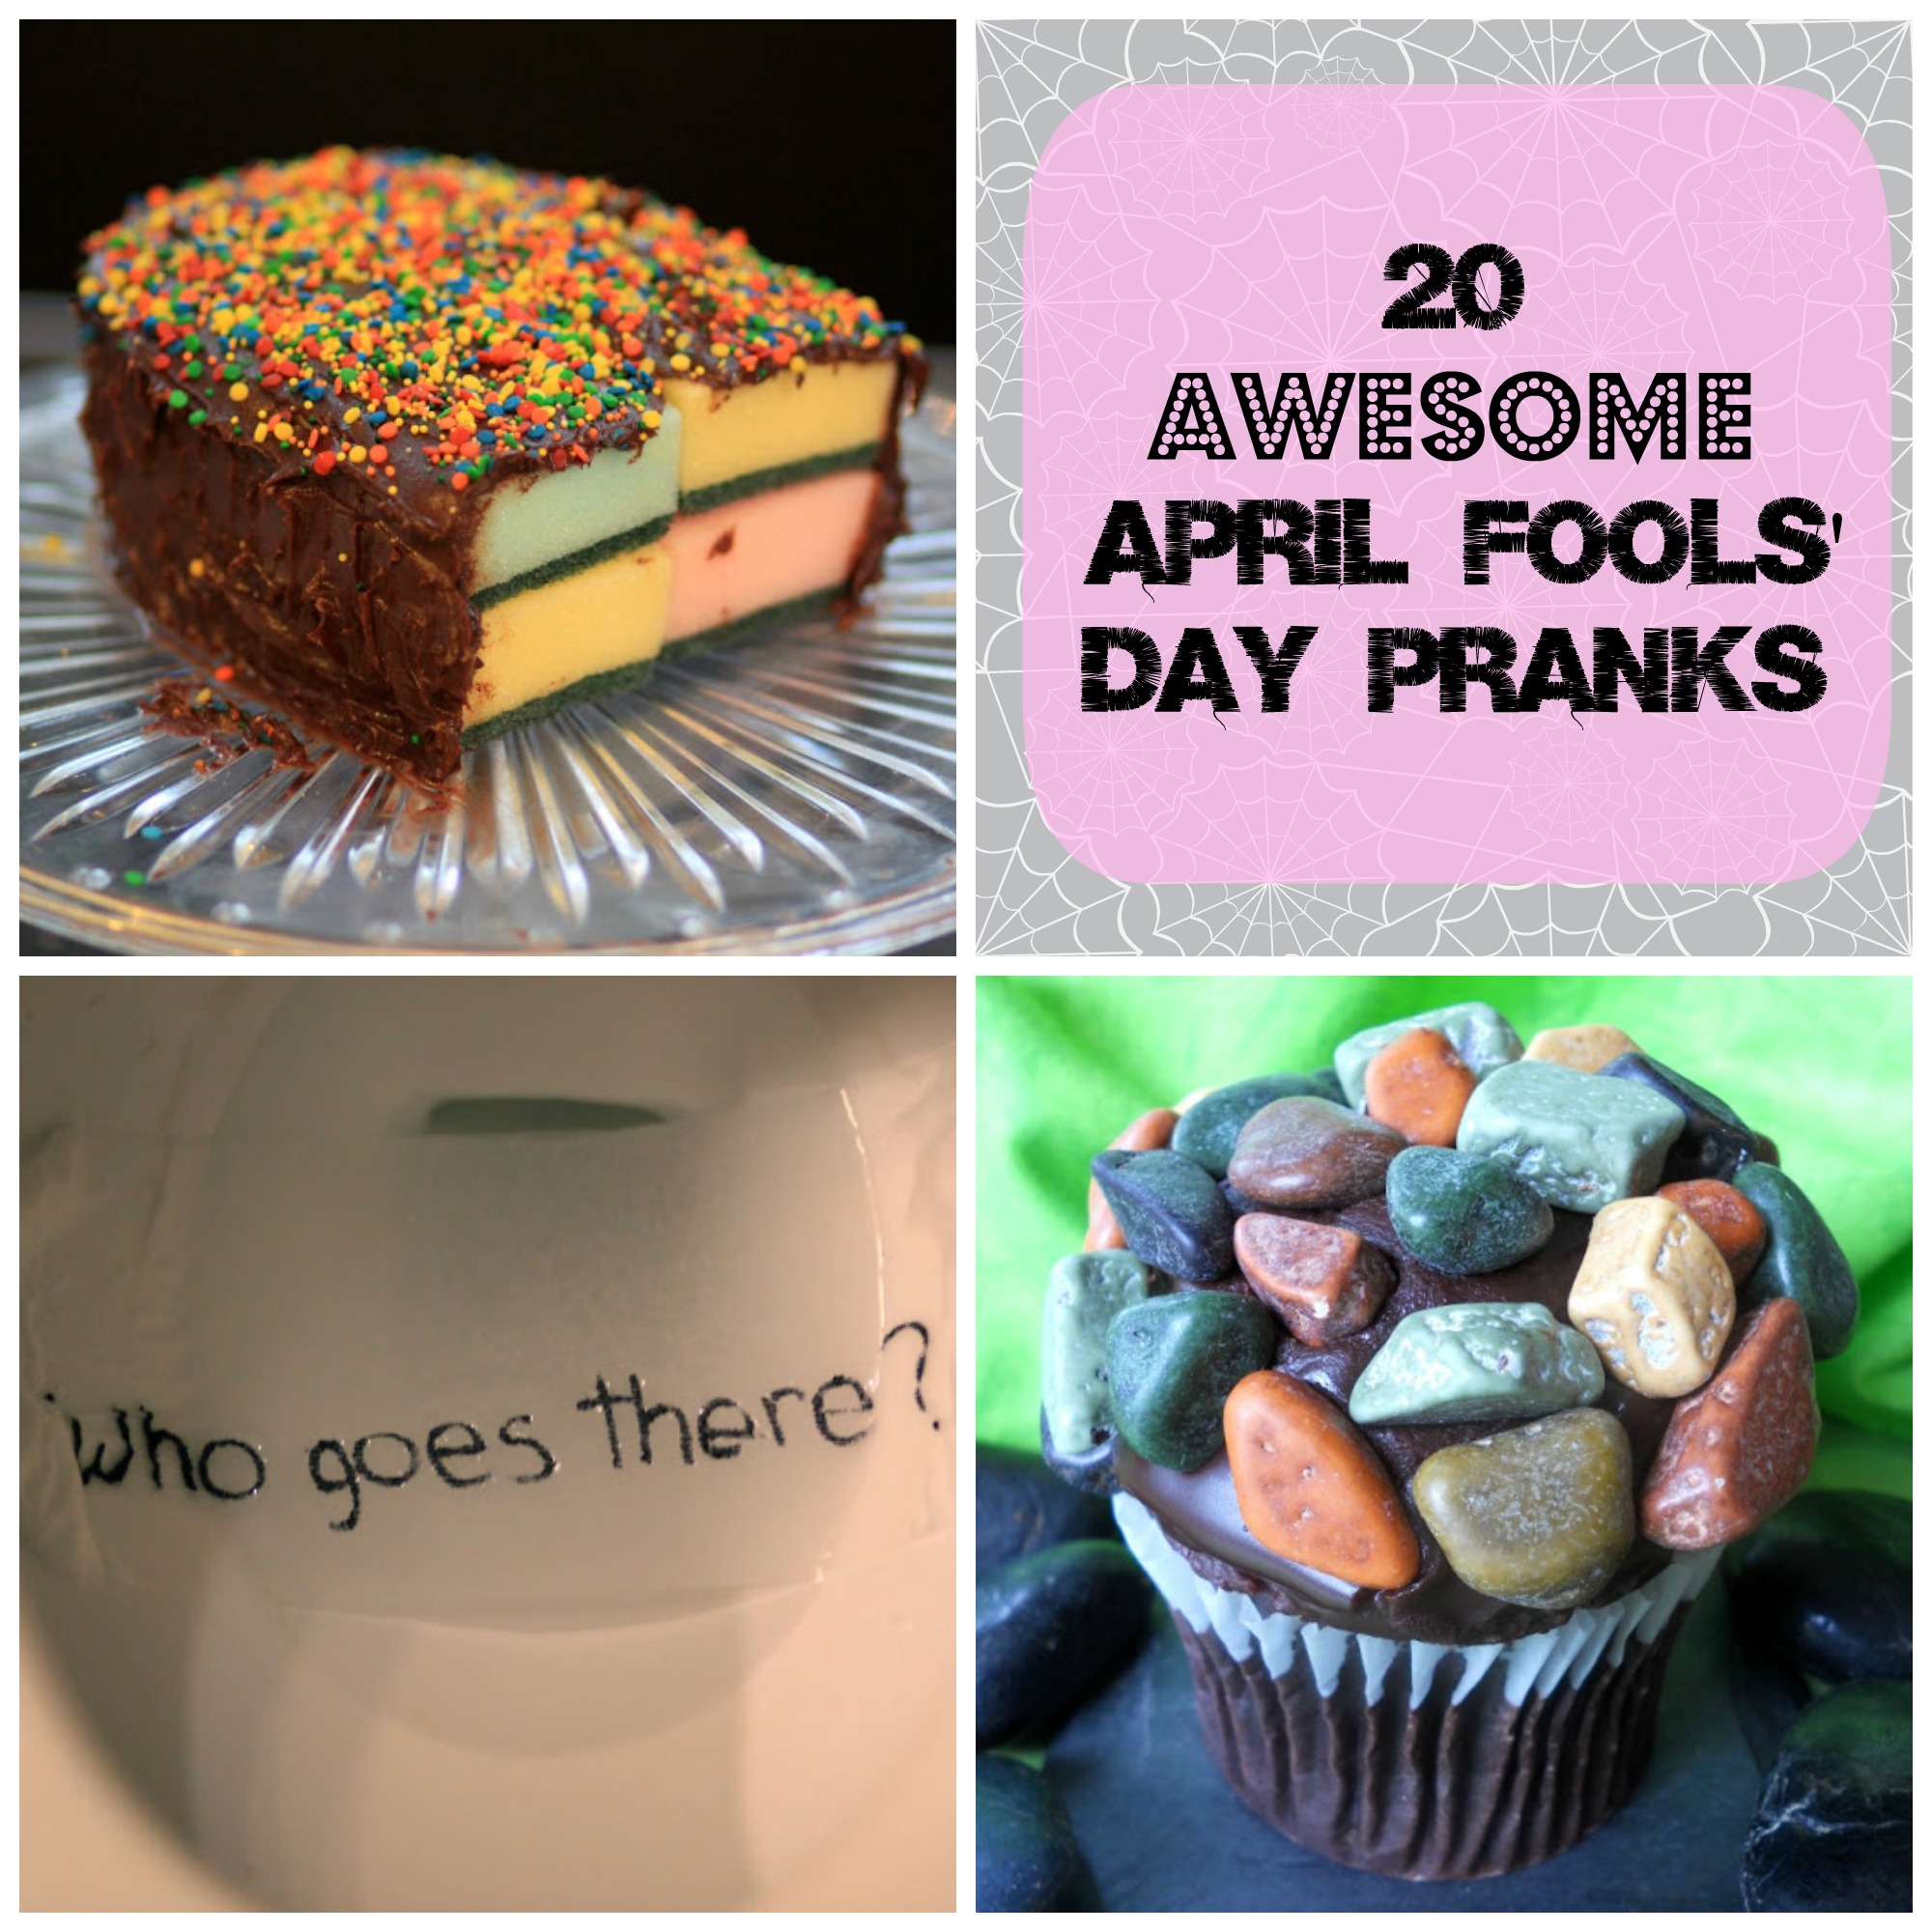 20 Awesome April Fools’ Day Pranks to Fool the Family Club Chica